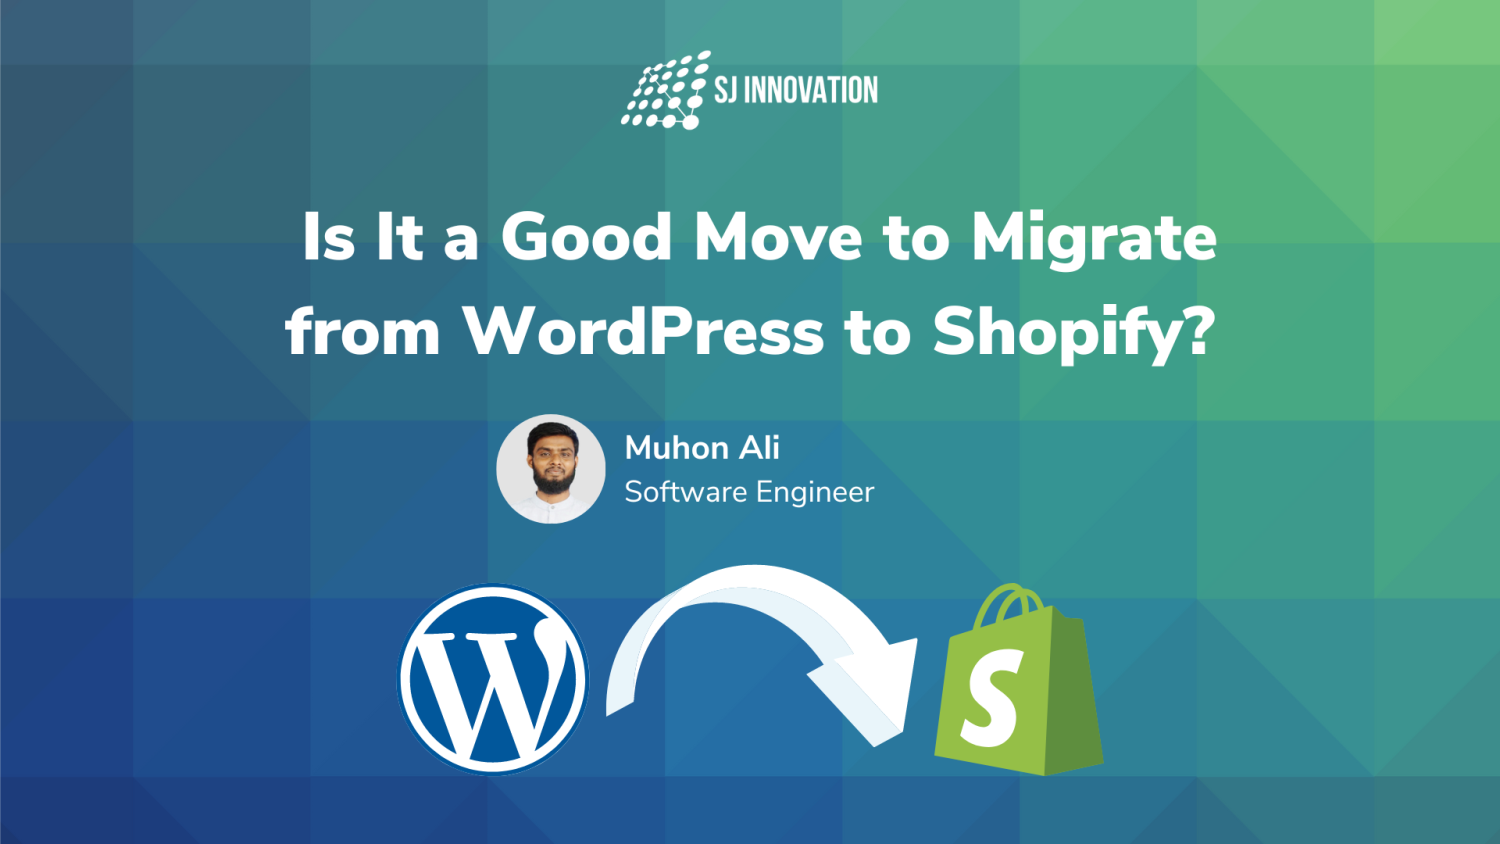 Is It a Good Move to Migrate from WordPress to Shopify?